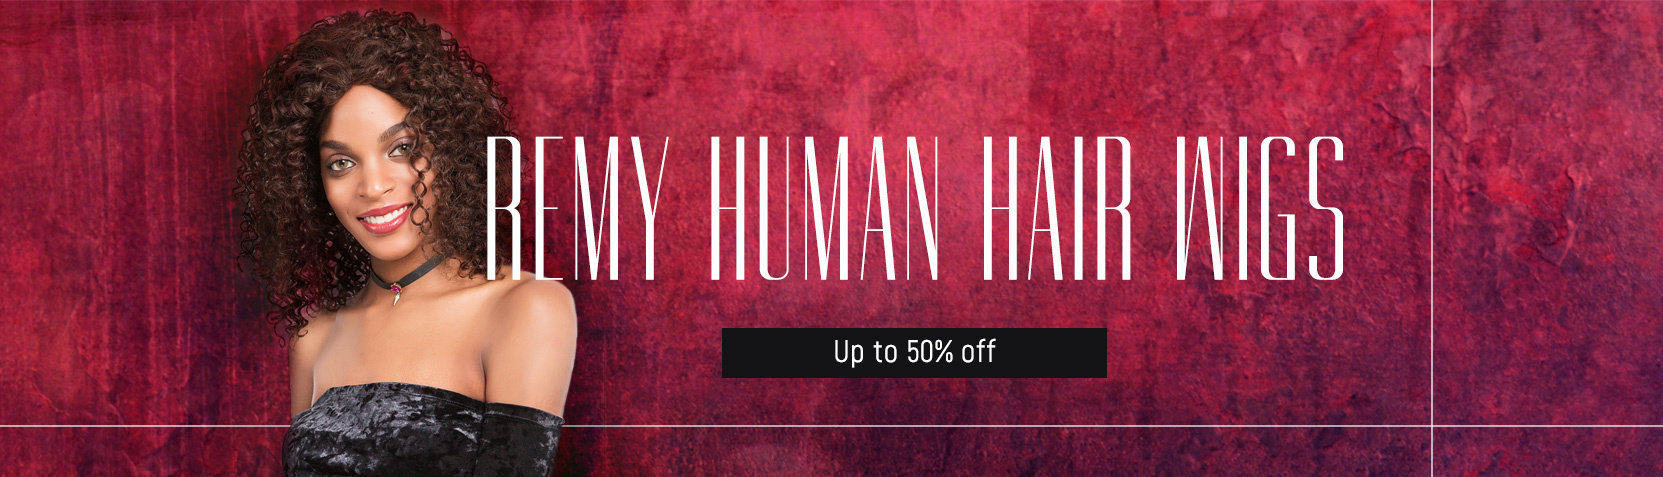 Remy human hair wigs up to 50% off